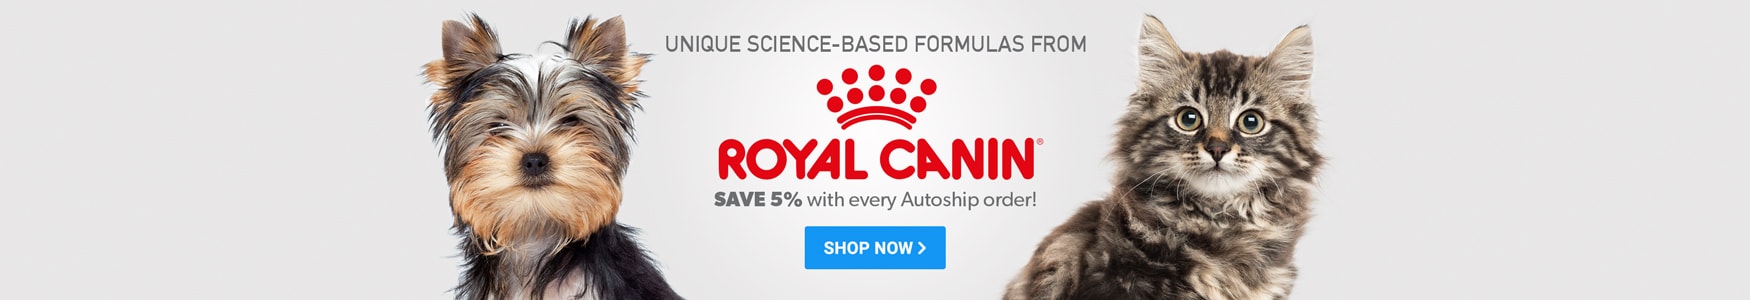 Unique Science-Based Formulas from Royal Canin. Save 5% with every Autoship Order!